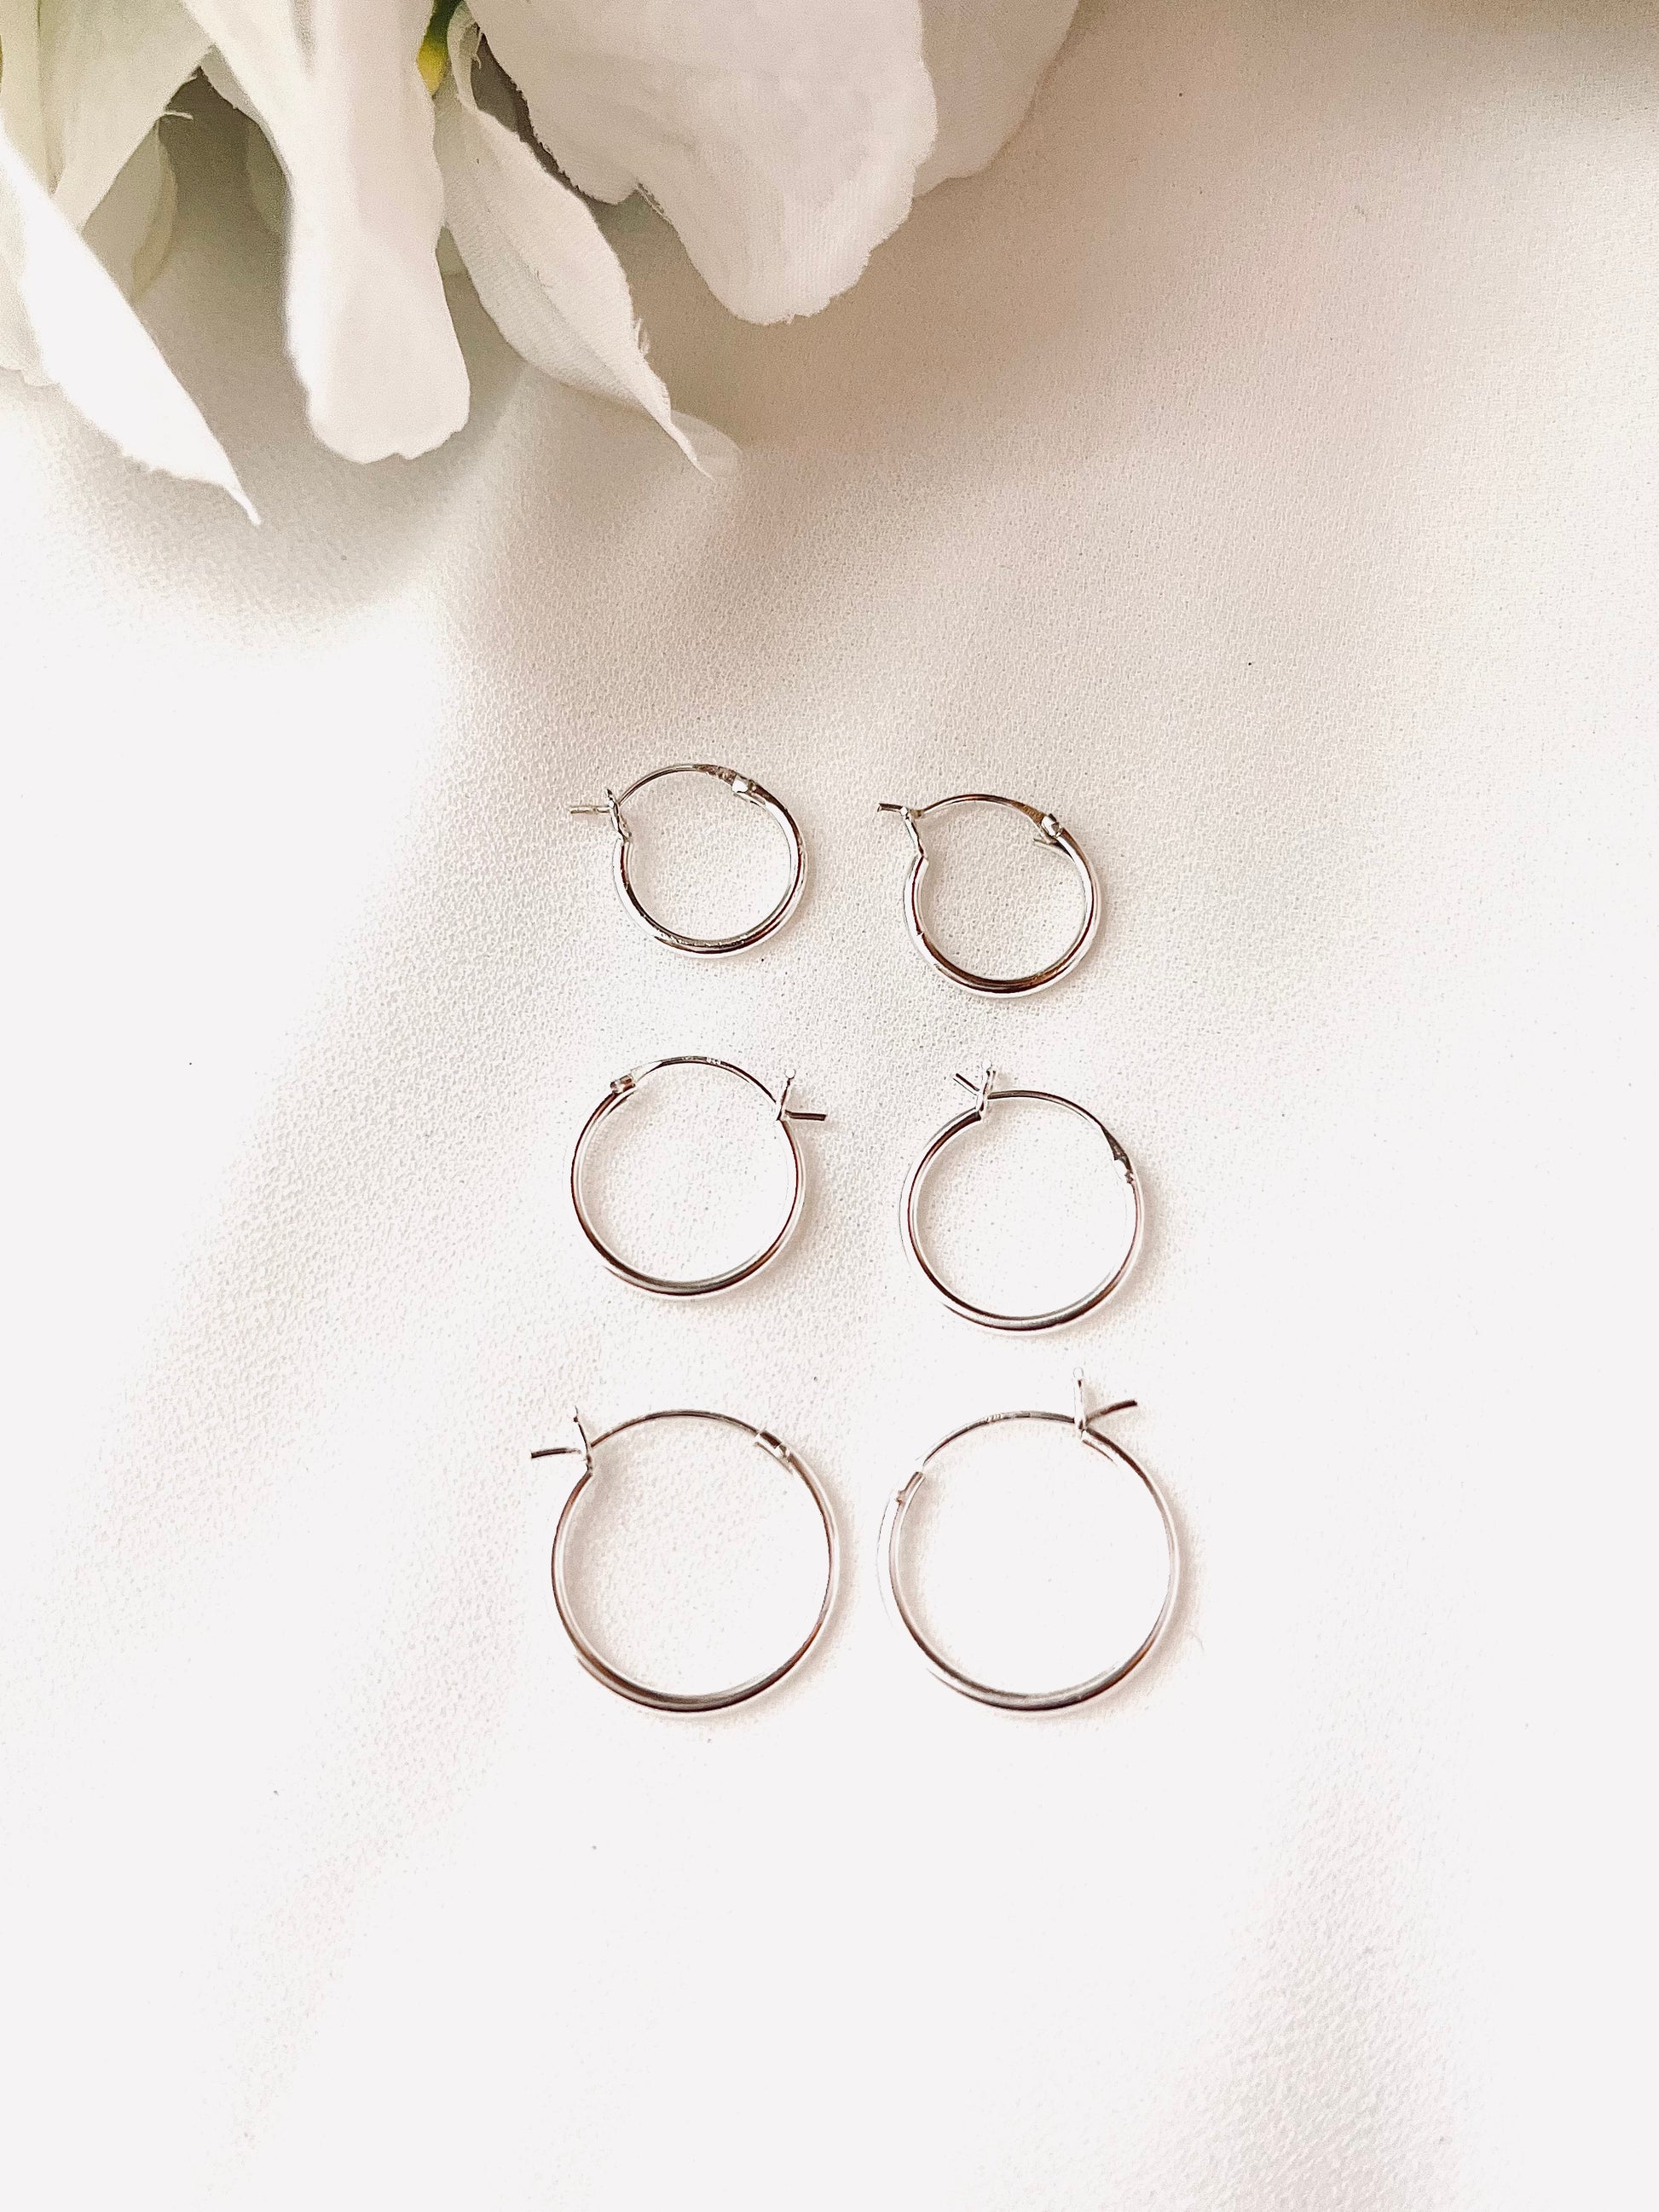 Hoop Earrings Set, Set Of 3, French Lock Hoop Earrings Set, Gift Set, Classic Hoops Set, Simple Hoop Earrings Set, Gift For Her, Minimalist Jewelry, Everyday Jewelry, Simple and Dainty